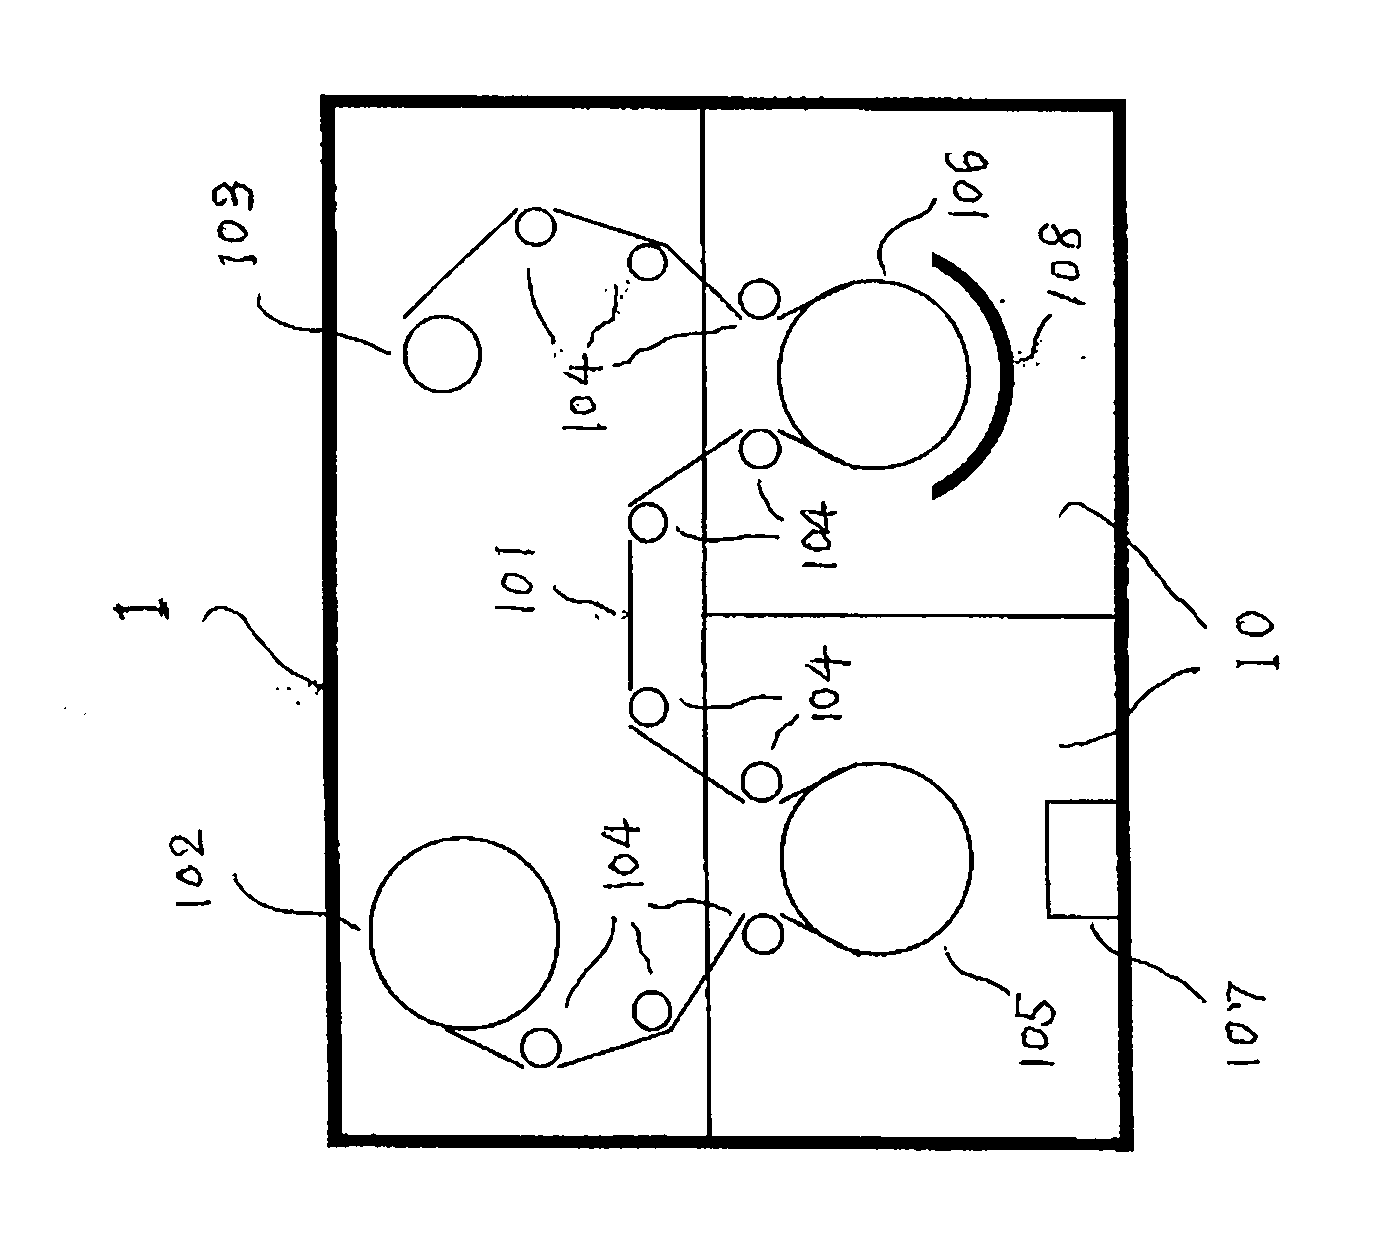 Process for producing multilayered gas-barrier film